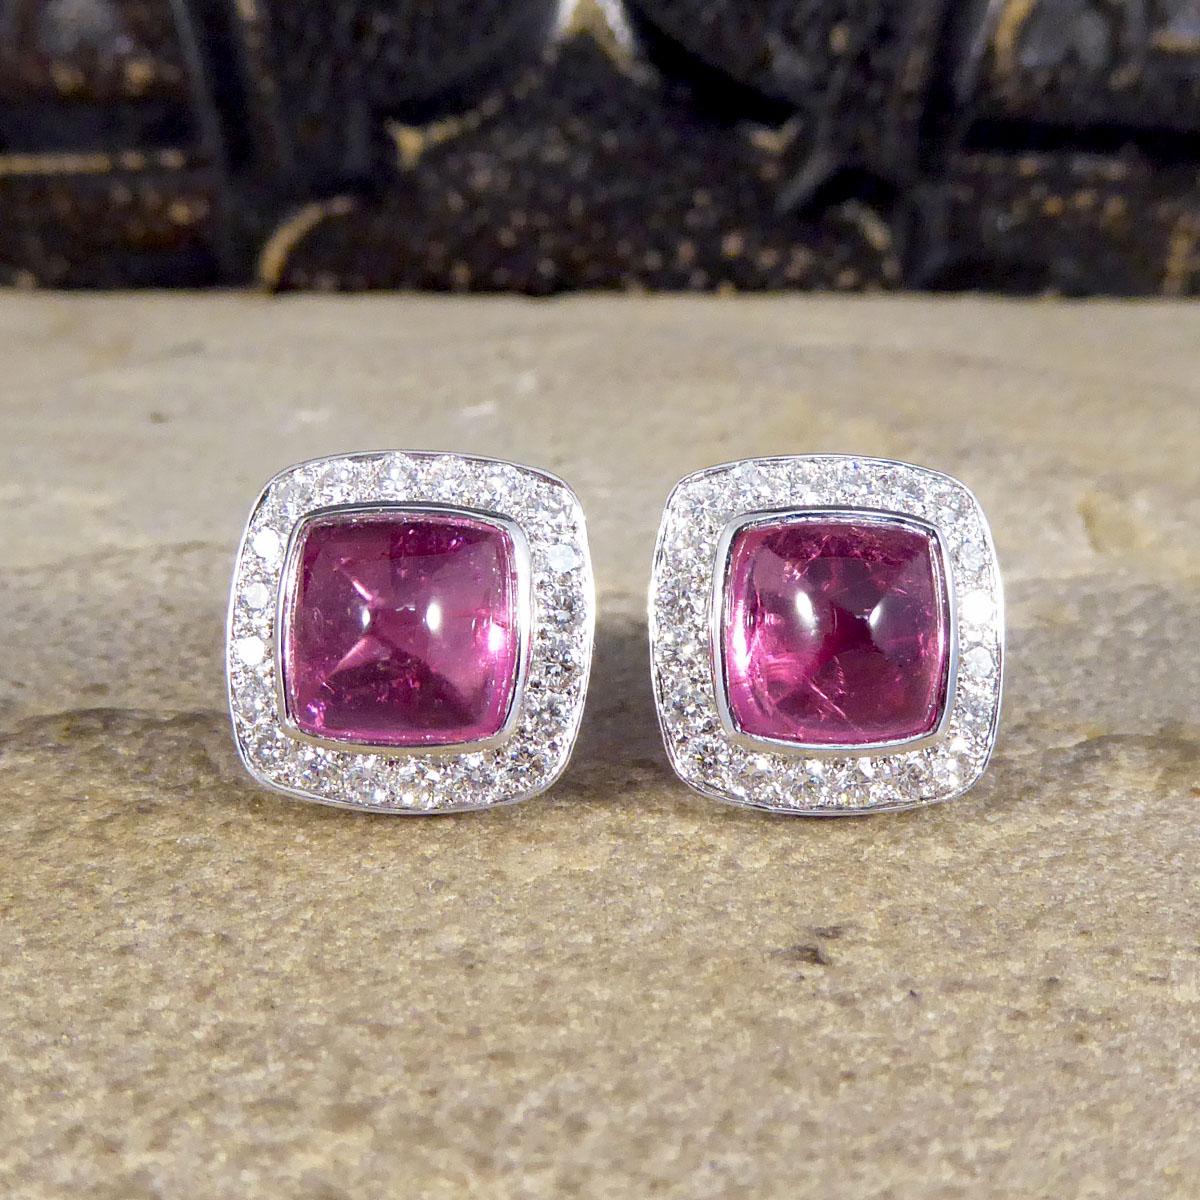 Such a beautiful pair of contemporary earrings made with quality stones and craftsmanship. Each stud features a Sugarloaf cut Pink Tourmaline in the centre weighing 2.89ct each in a rub over setting with a halo border of brilliant cut Diamonds in a